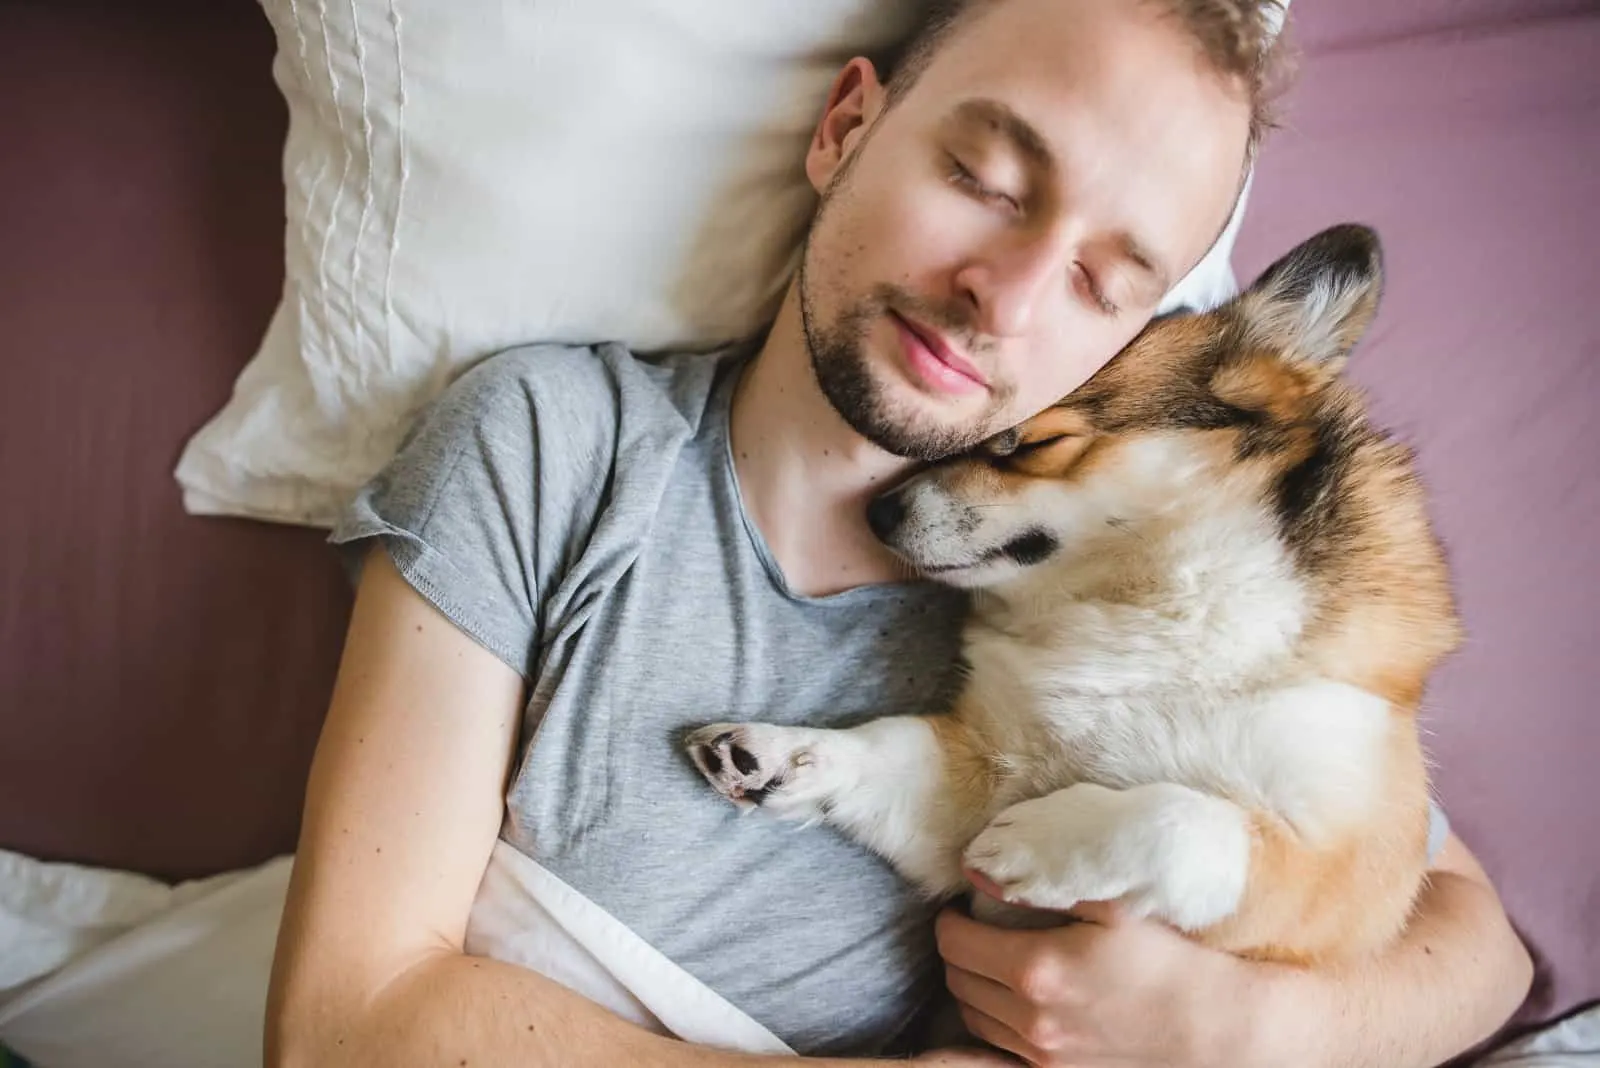 Dog and owner sleeping on bed